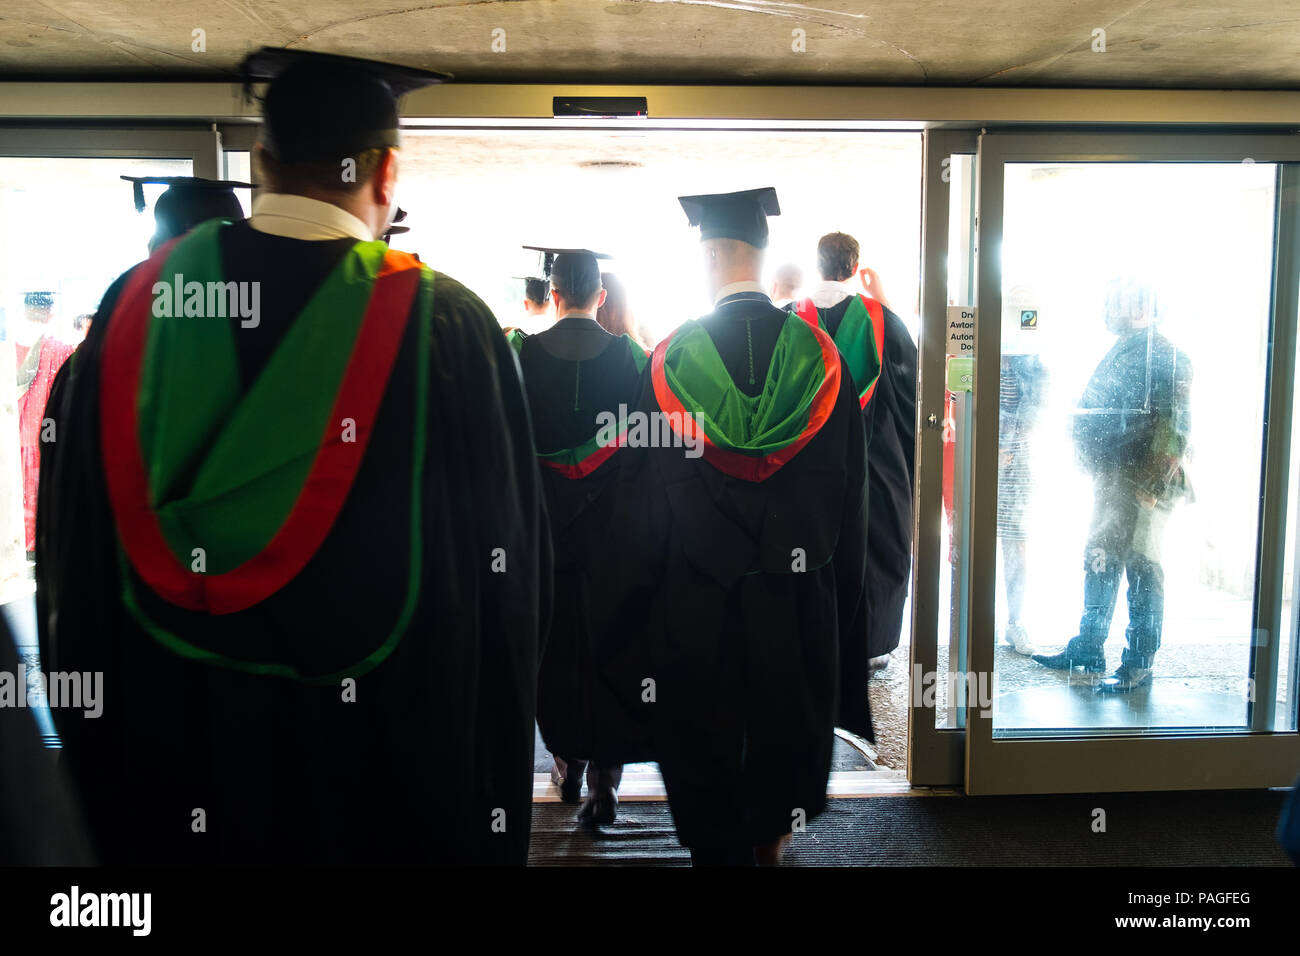 Higher Education in the UK: Students graduating from Aberystwyth university, in their traditional mortar boards and black academic gowns. July 2018 Stock Photo